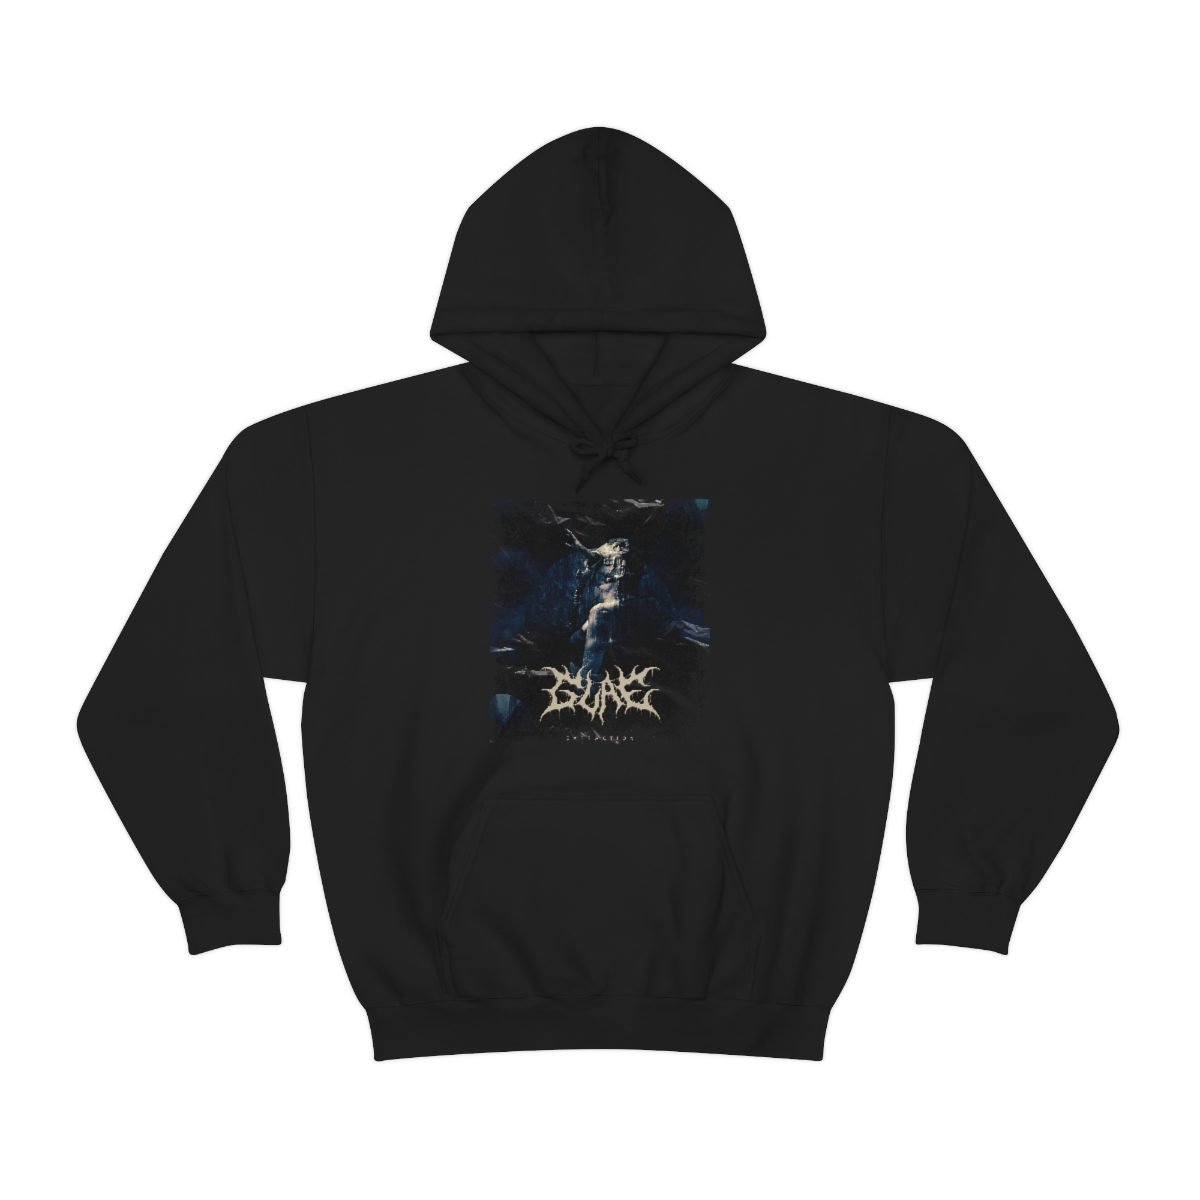 Glae – Extraction Pullover Hooded Sweatshirt